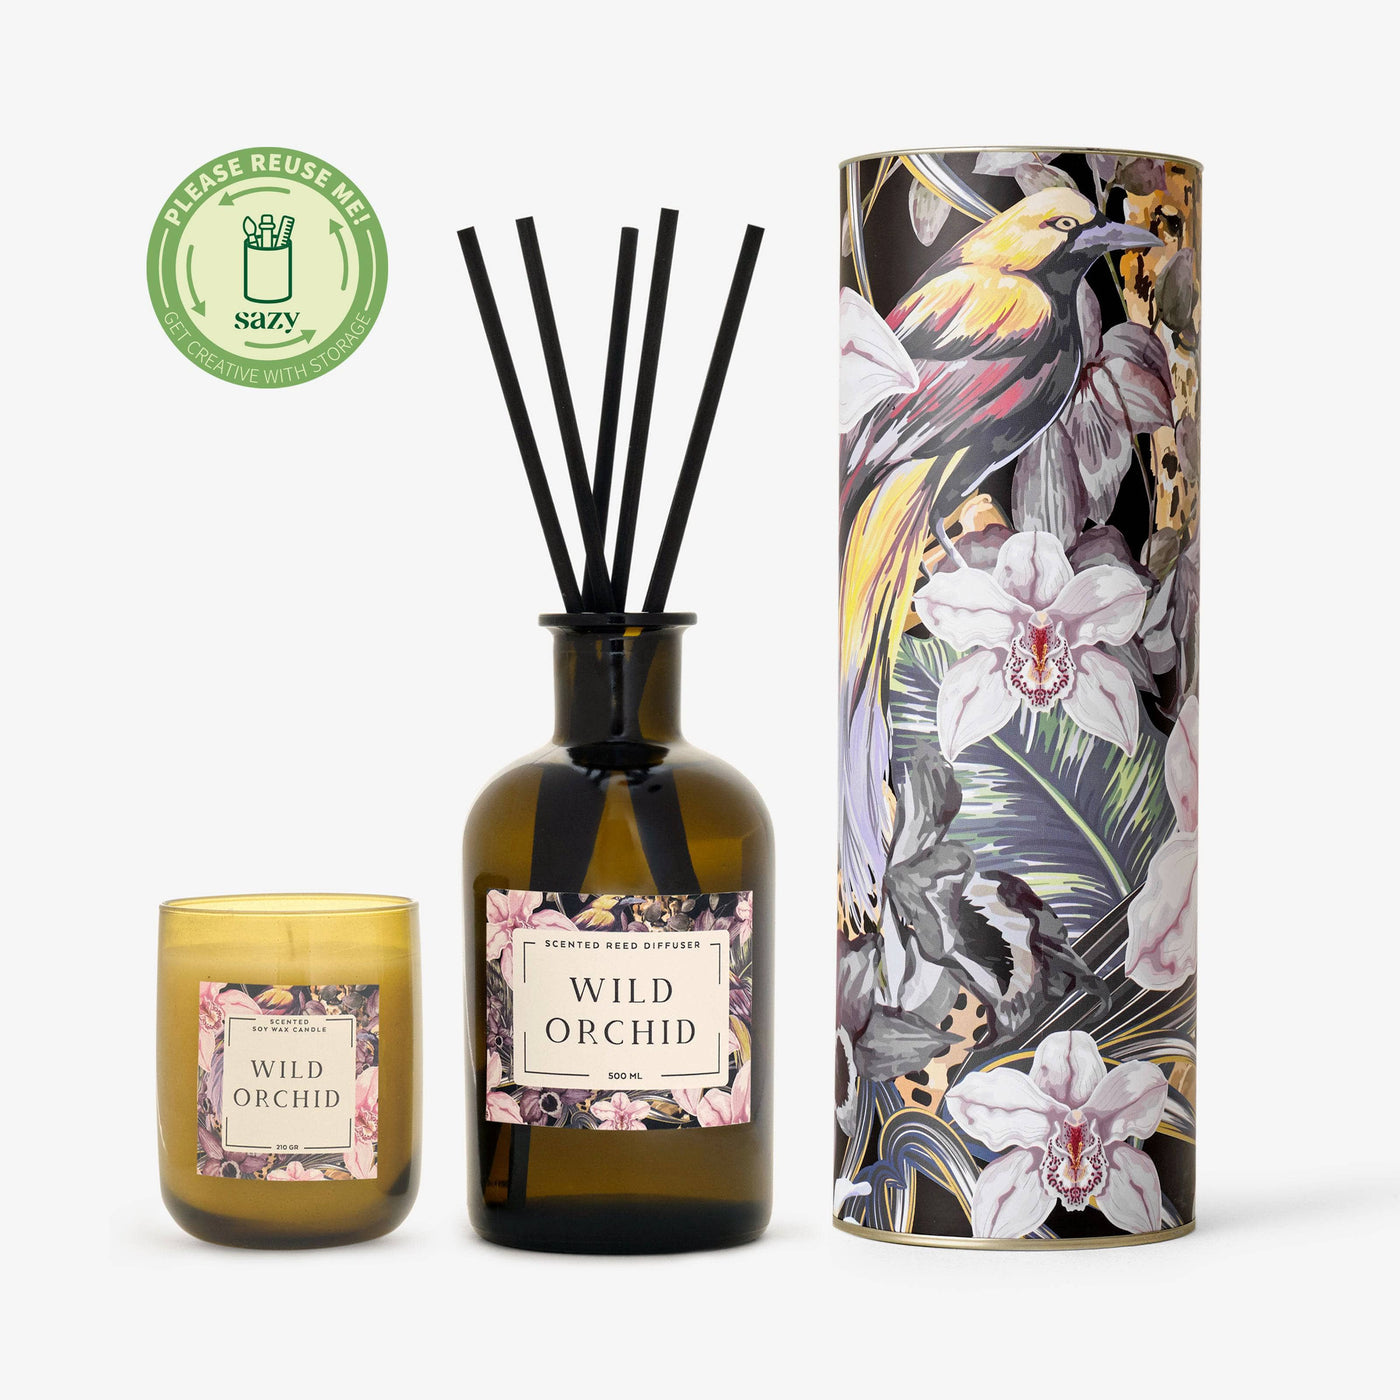 Wild Orchid Candle - Diffuser Set, Amber Diffusers sazy.com